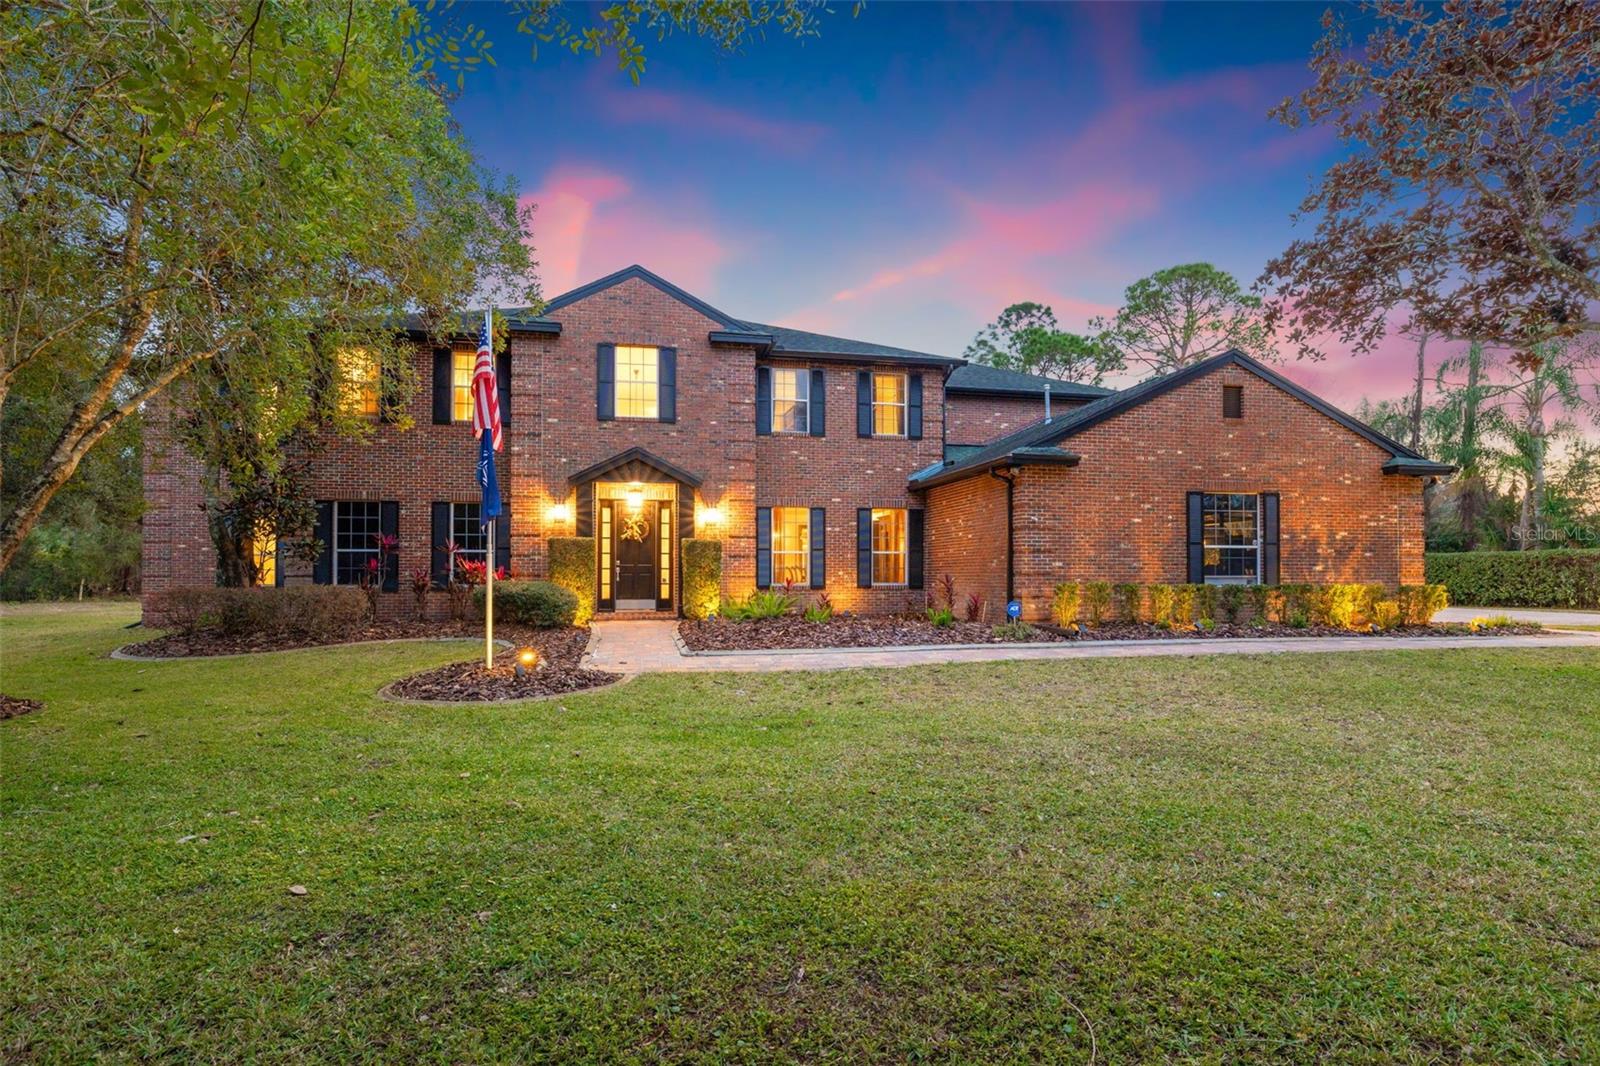 Welcome to 2982 Cypress Pointe Ct, a stunning 5-bedroom, 3 full bath, and 2 half bath residence.